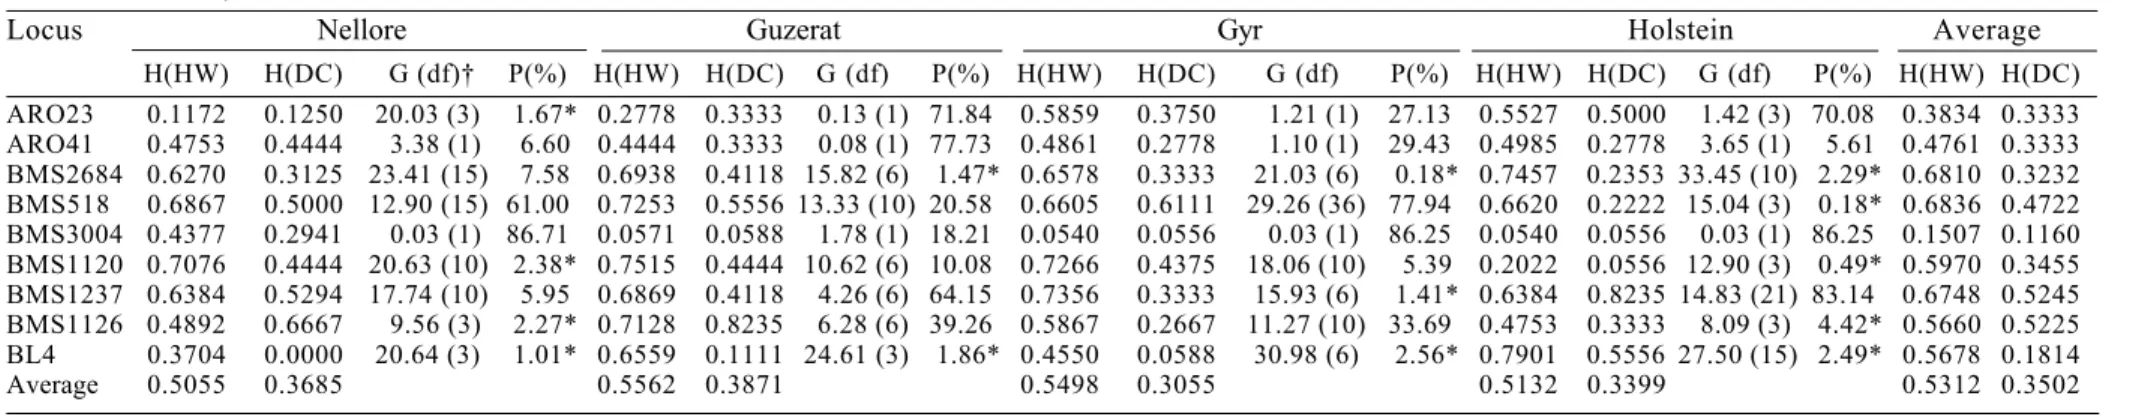 Table 1 - Hardy-Weinberg heterozygosity H(HW); direct count heterozygosity H(DC);  G statistics; and Hardy-Weinberg equilibrium probability (P) for each locus combined to four cattle breeds Gyr, Nellore, Guzerat and Holstein